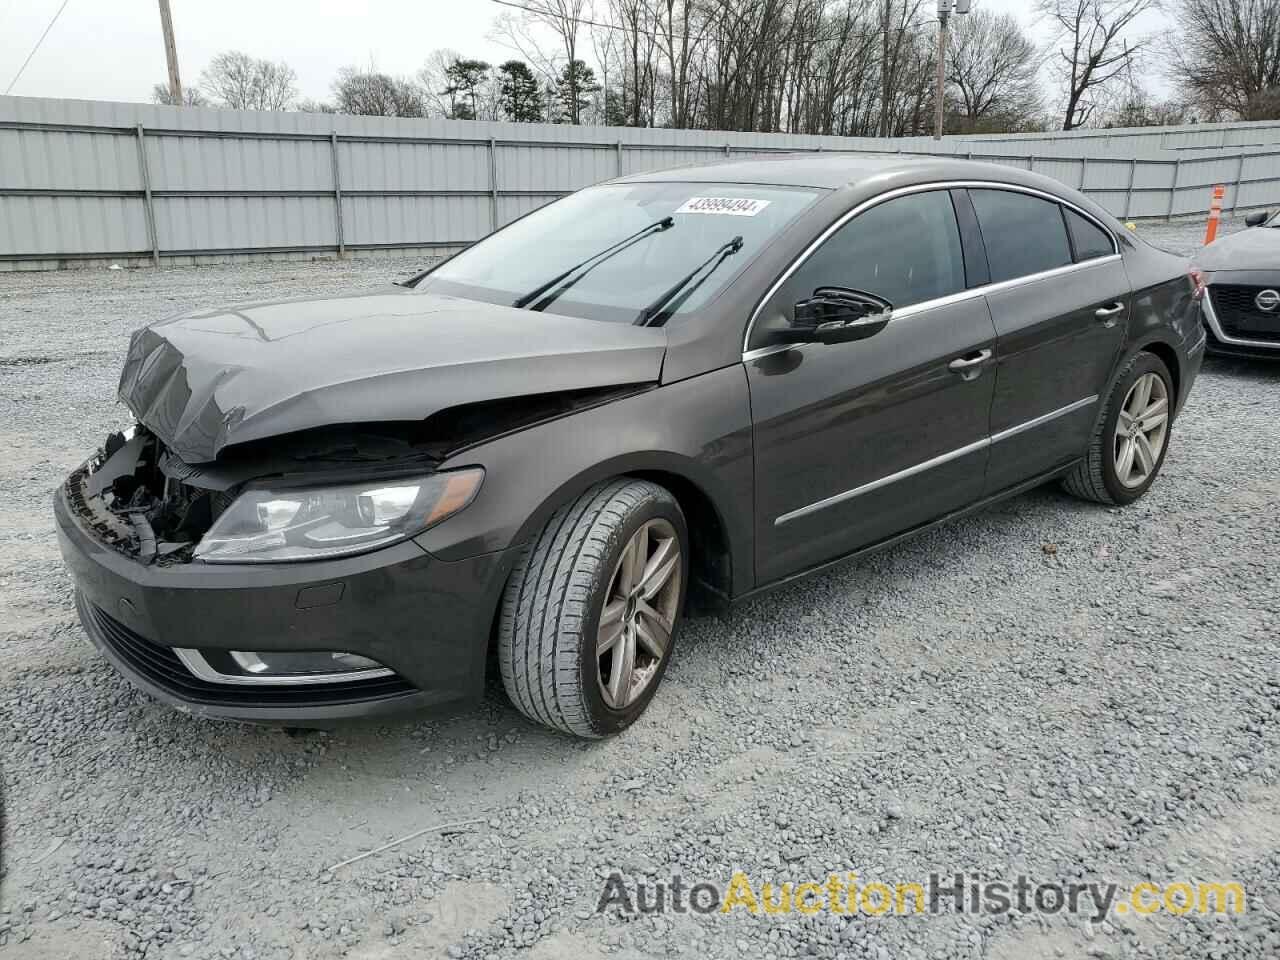 VOLKSWAGEN CC SPORT, WVWBN7ANXDE569783